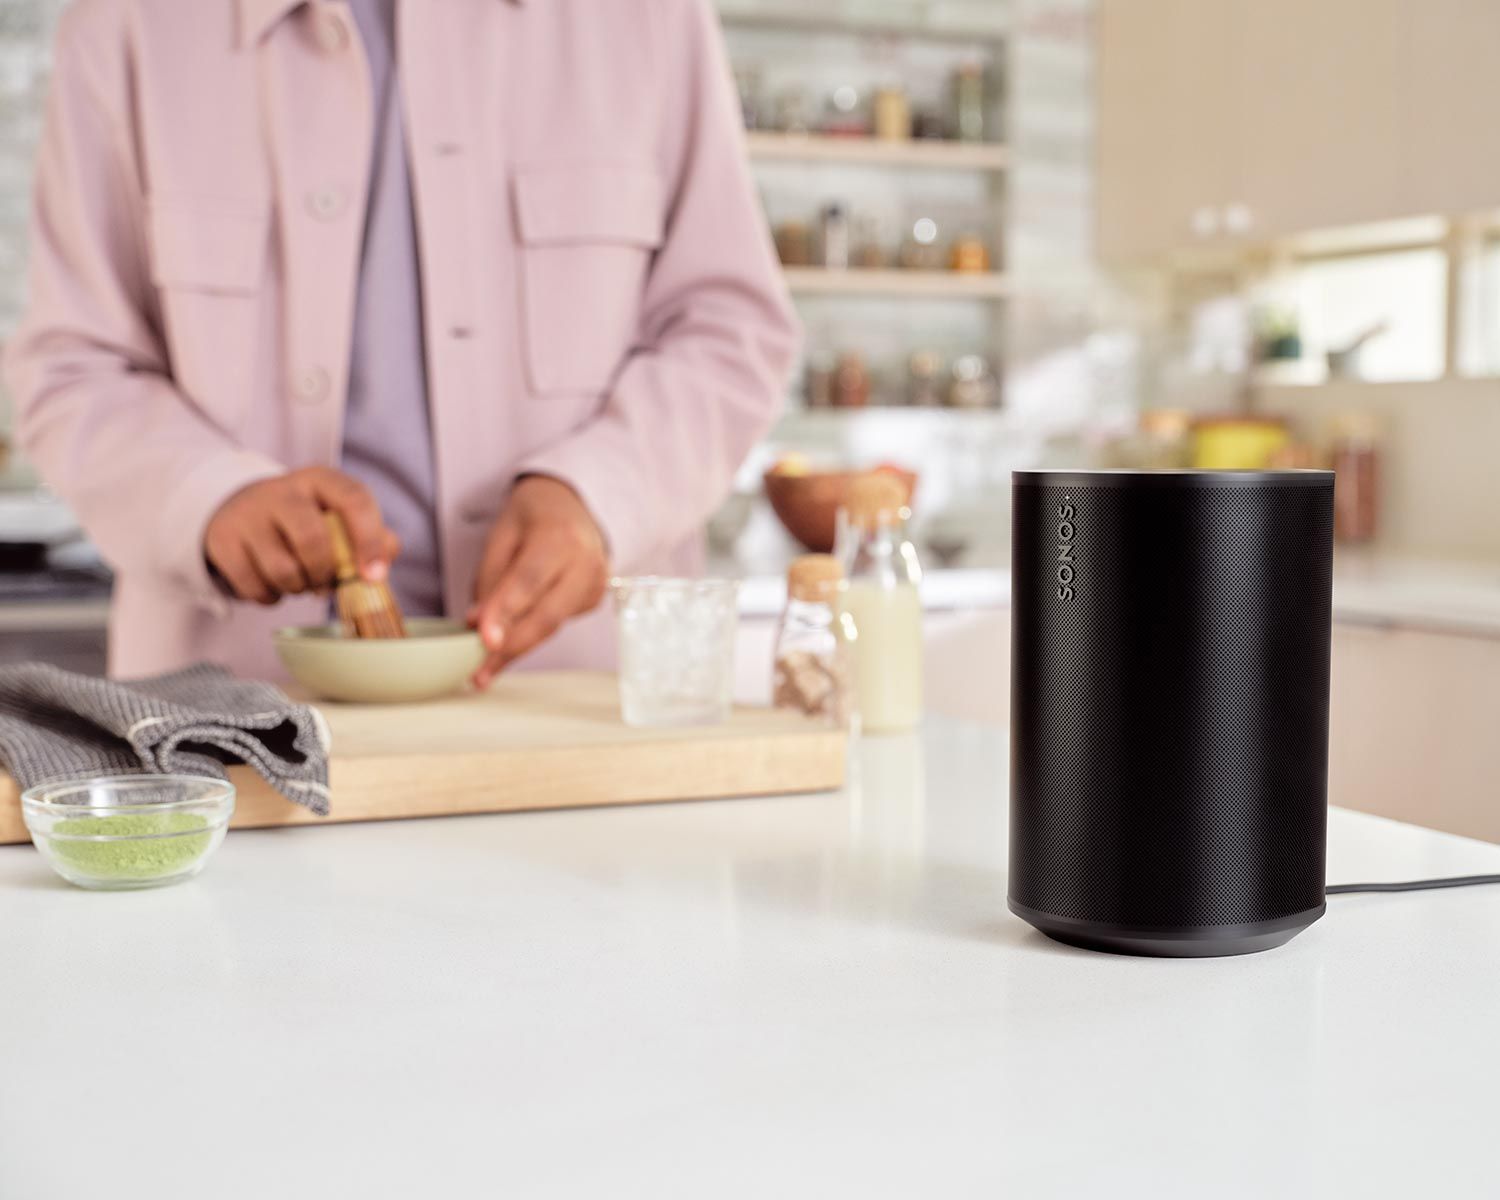 A close-up of a Sonos speaker on a kitchen counter, with a person preparing food in the background.